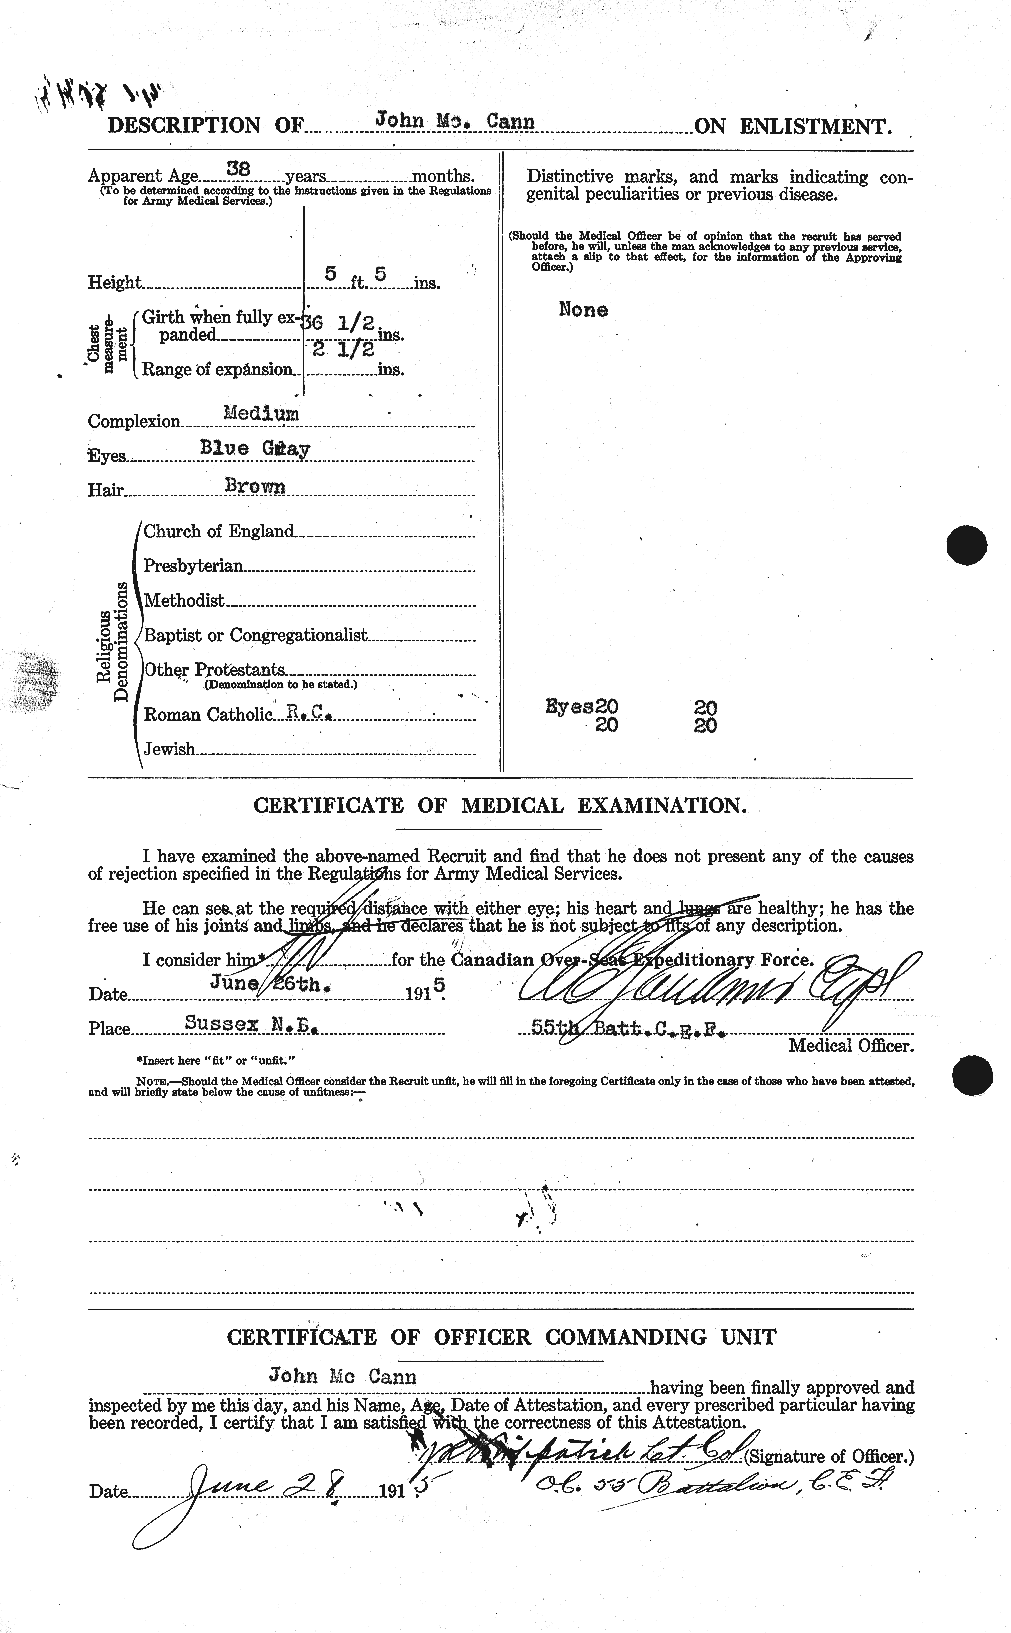 Personnel Records of the First World War - CEF 132727b